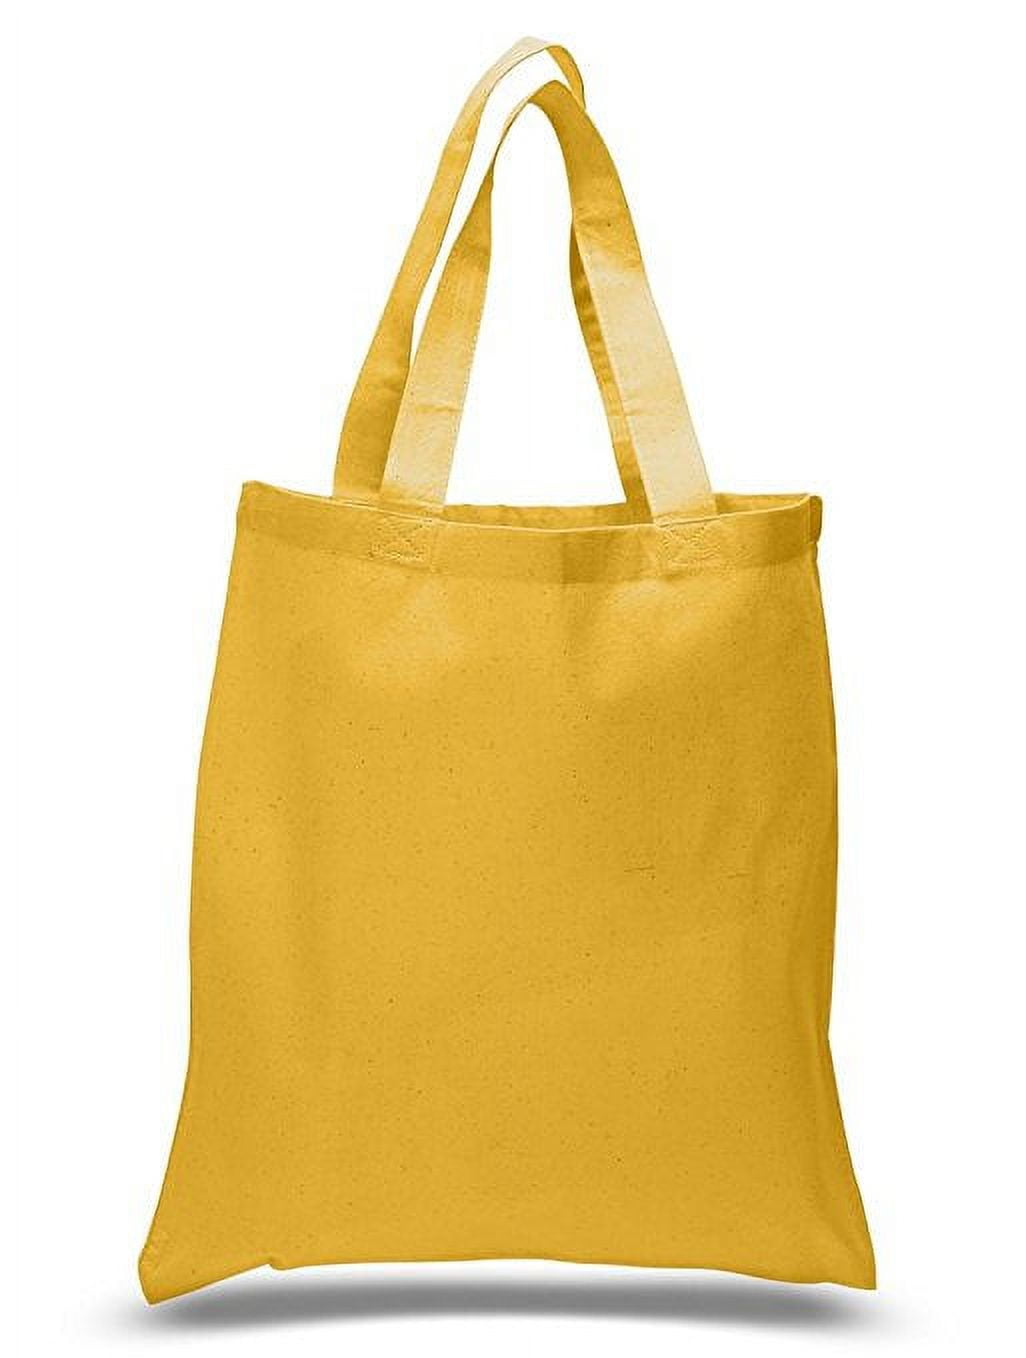 Reusable Canvas Bag - Decorate the Blank Tote Bag with Your Own Custom  Design.